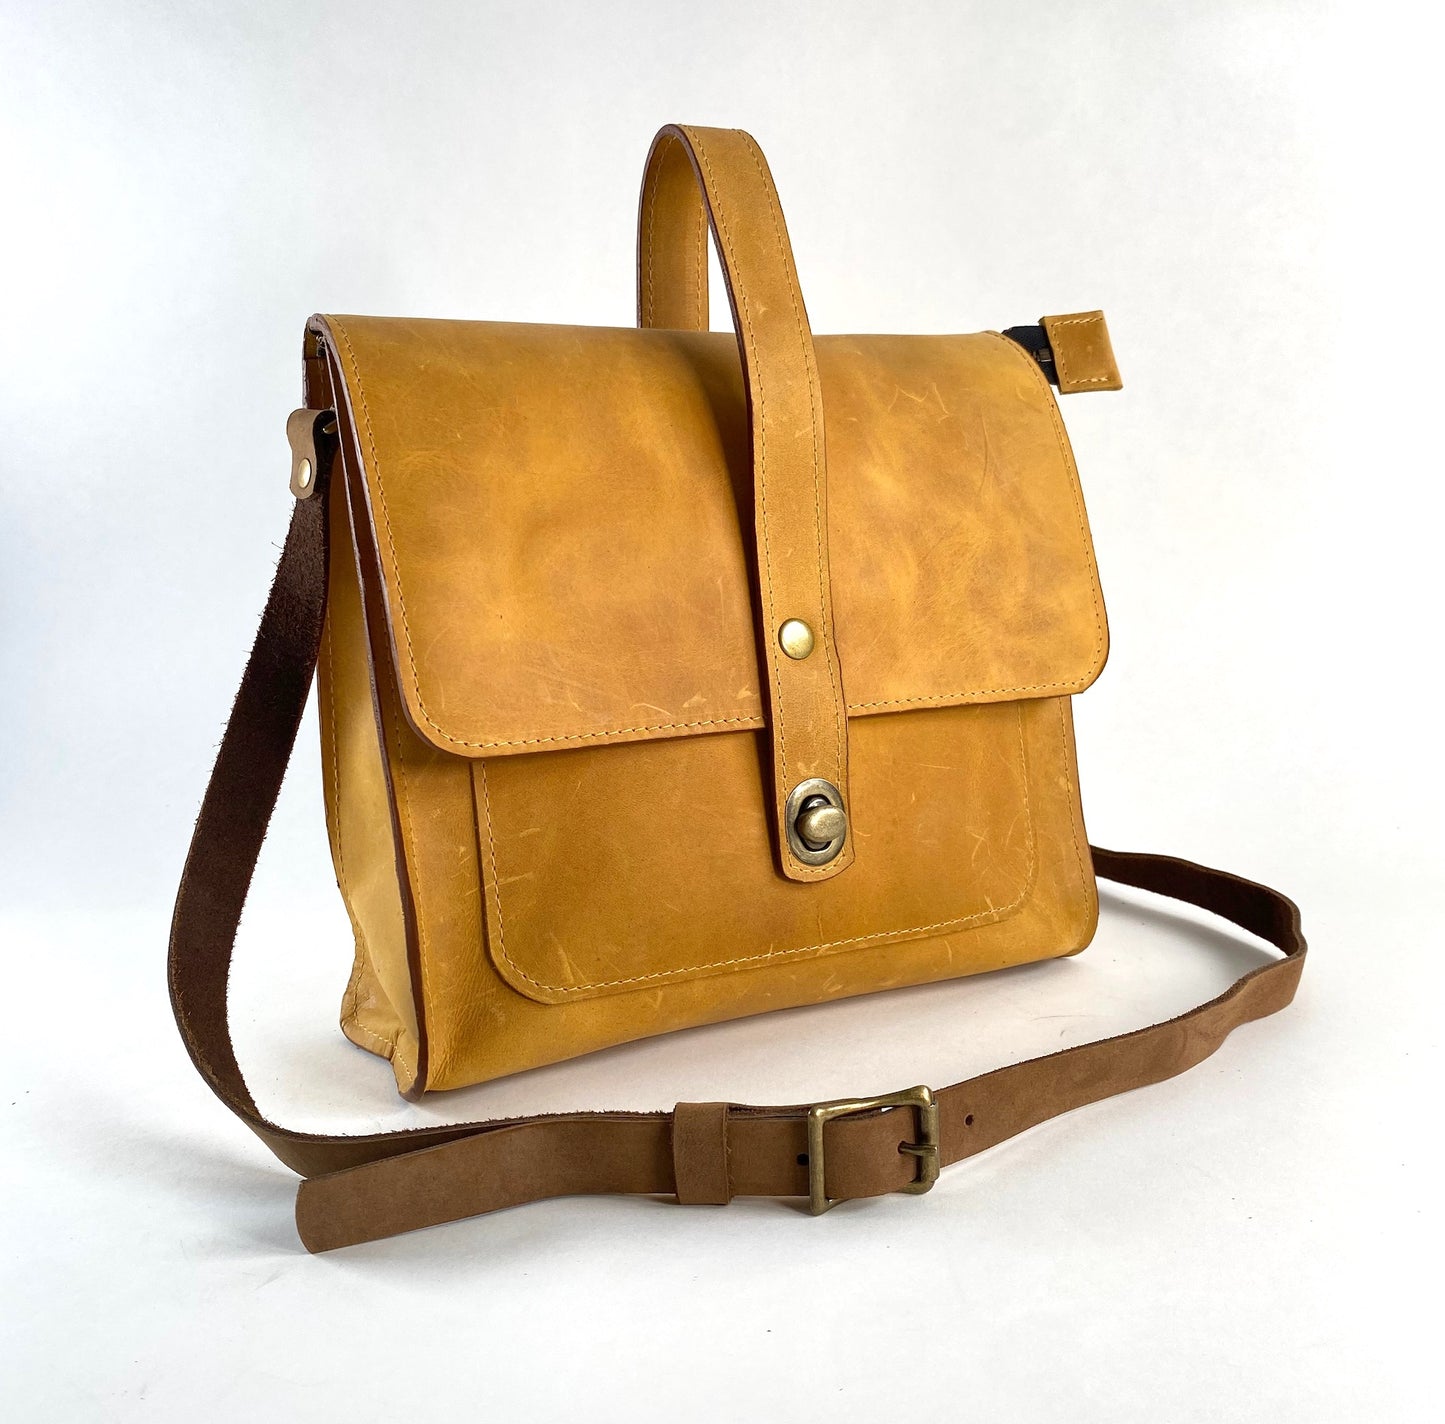 Leather Satchel Purse in Tan/Yellow